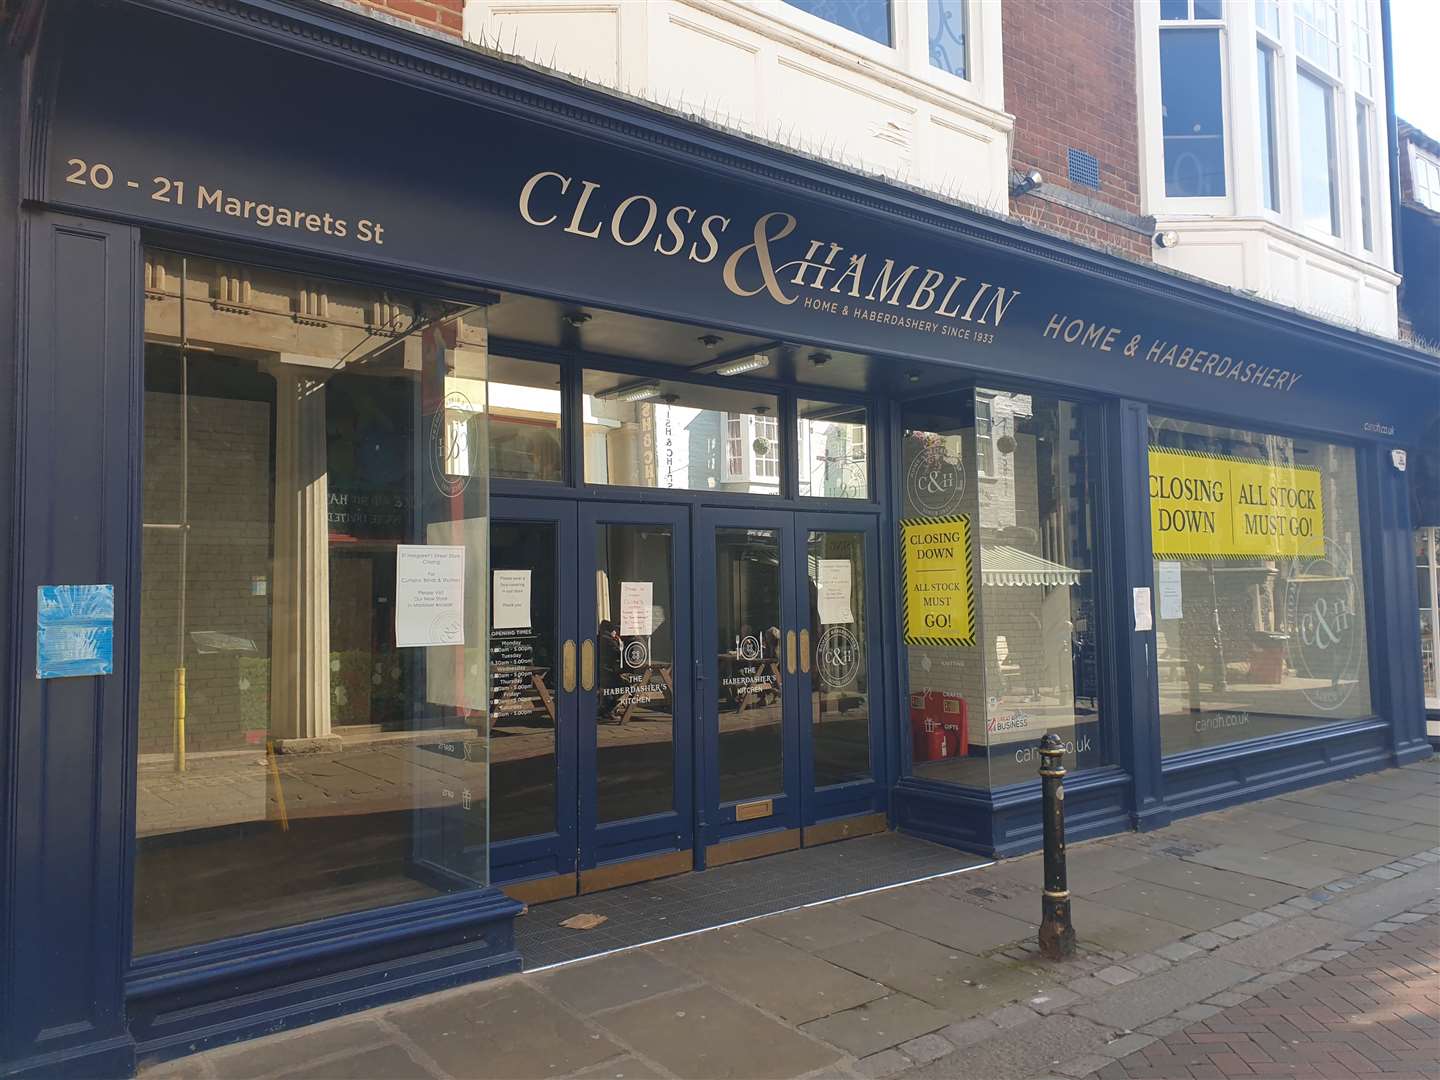 The Closs & Hamblin store in St Margaret's Street is to become a Cosy Club restaurant